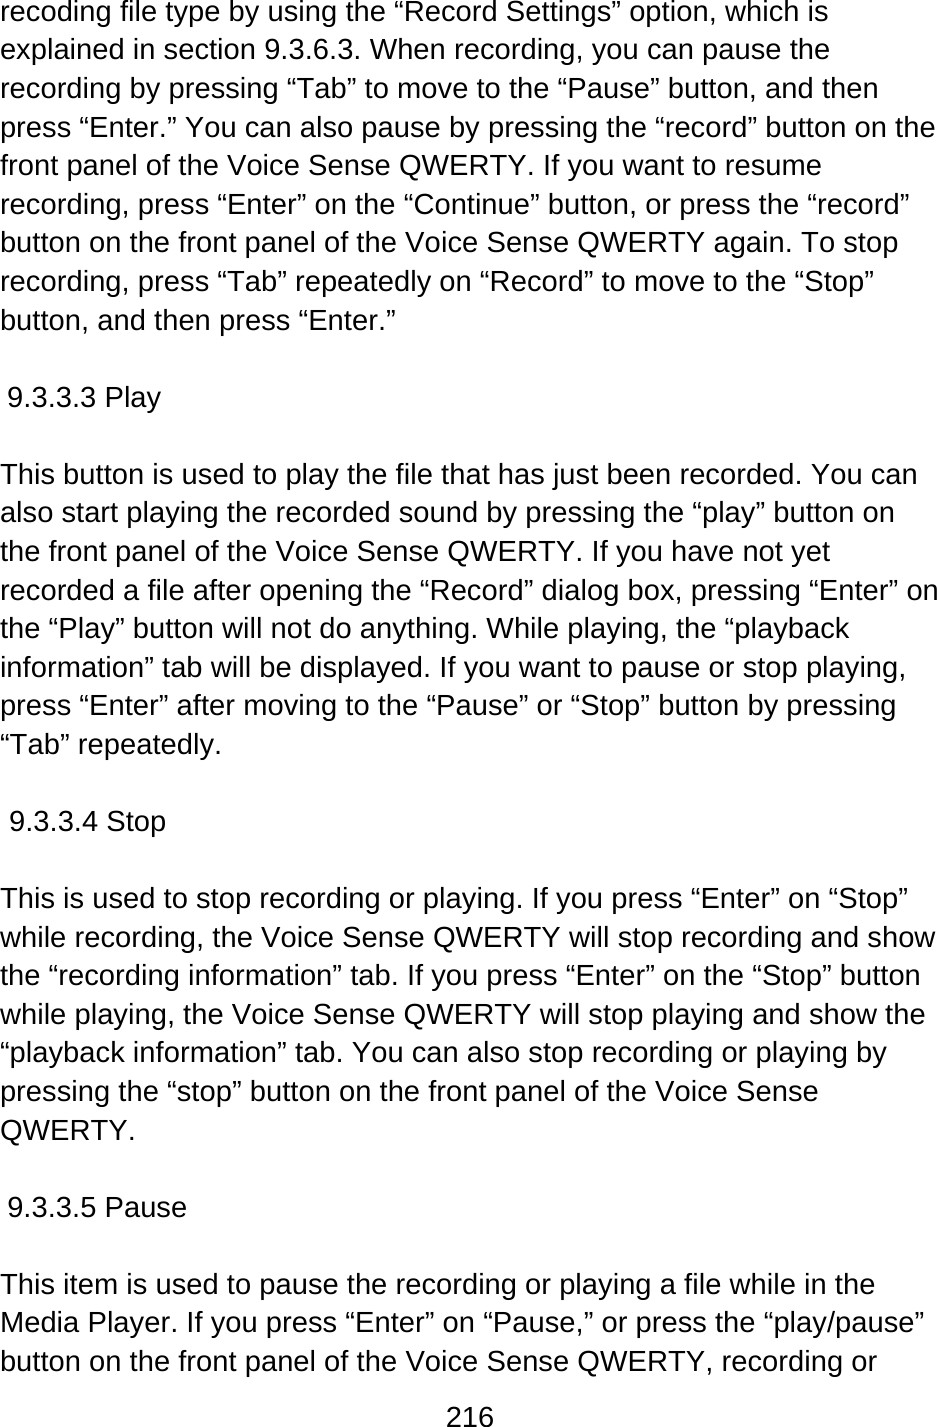 216  recoding file type by using the “Record Settings” option, which is explained in section 9.3.6.3. When recording, you can pause the recording by pressing “Tab” to move to the “Pause” button, and then press “Enter.” You can also pause by pressing the “record” button on the front panel of the Voice Sense QWERTY. If you want to resume recording, press “Enter” on the “Continue” button, or press the “record” button on the front panel of the Voice Sense QWERTY again. To stop recording, press “Tab” repeatedly on “Record” to move to the “Stop” button, and then press “Enter.”  9.3.3.3 Play  This button is used to play the file that has just been recorded. You can also start playing the recorded sound by pressing the “play” button on the front panel of the Voice Sense QWERTY. If you have not yet recorded a file after opening the “Record” dialog box, pressing “Enter” on the “Play” button will not do anything. While playing, the “playback information” tab will be displayed. If you want to pause or stop playing, press “Enter” after moving to the “Pause” or “Stop” button by pressing “Tab” repeatedly.  9.3.3.4 Stop  This is used to stop recording or playing. If you press “Enter” on “Stop” while recording, the Voice Sense QWERTY will stop recording and show the “recording information” tab. If you press “Enter” on the “Stop” button while playing, the Voice Sense QWERTY will stop playing and show the “playback information” tab. You can also stop recording or playing by pressing the “stop” button on the front panel of the Voice Sense QWERTY.  9.3.3.5 Pause  This item is used to pause the recording or playing a file while in the Media Player. If you press “Enter” on “Pause,” or press the “play/pause” button on the front panel of the Voice Sense QWERTY, recording or 